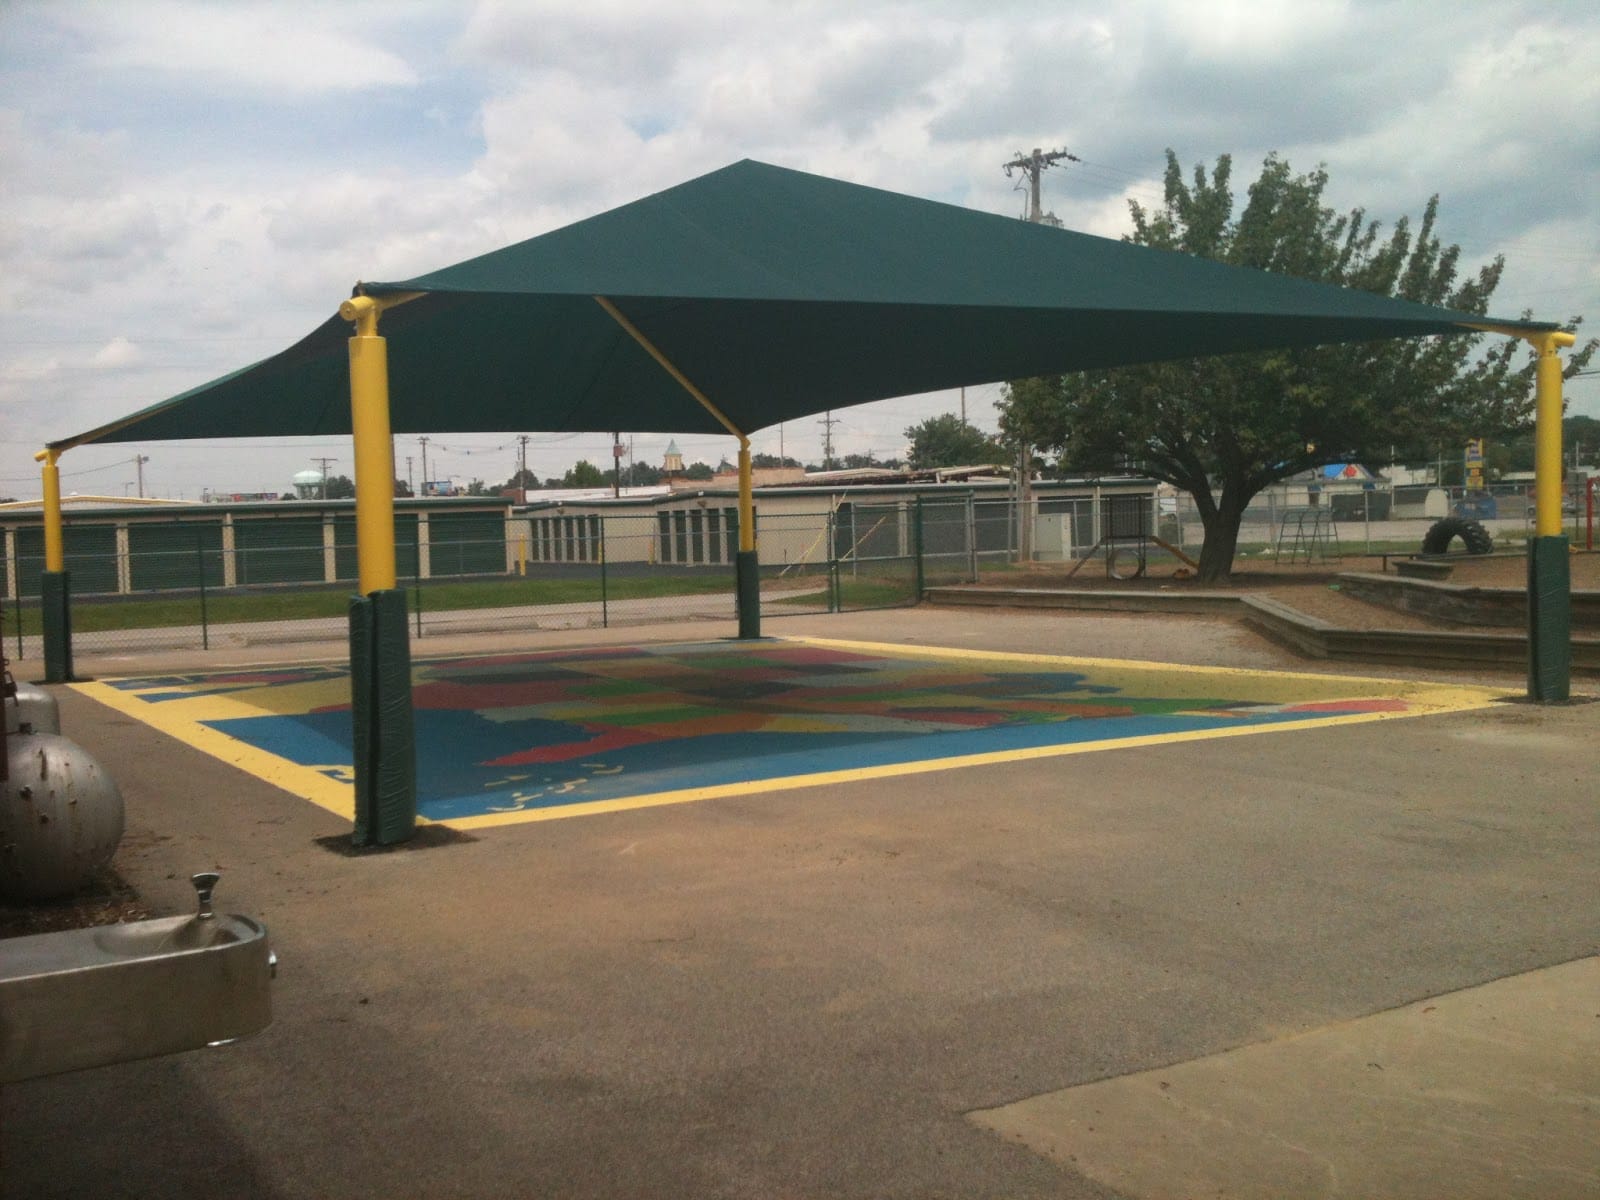 Large playground shade canopy structure over a colorful map of the United States